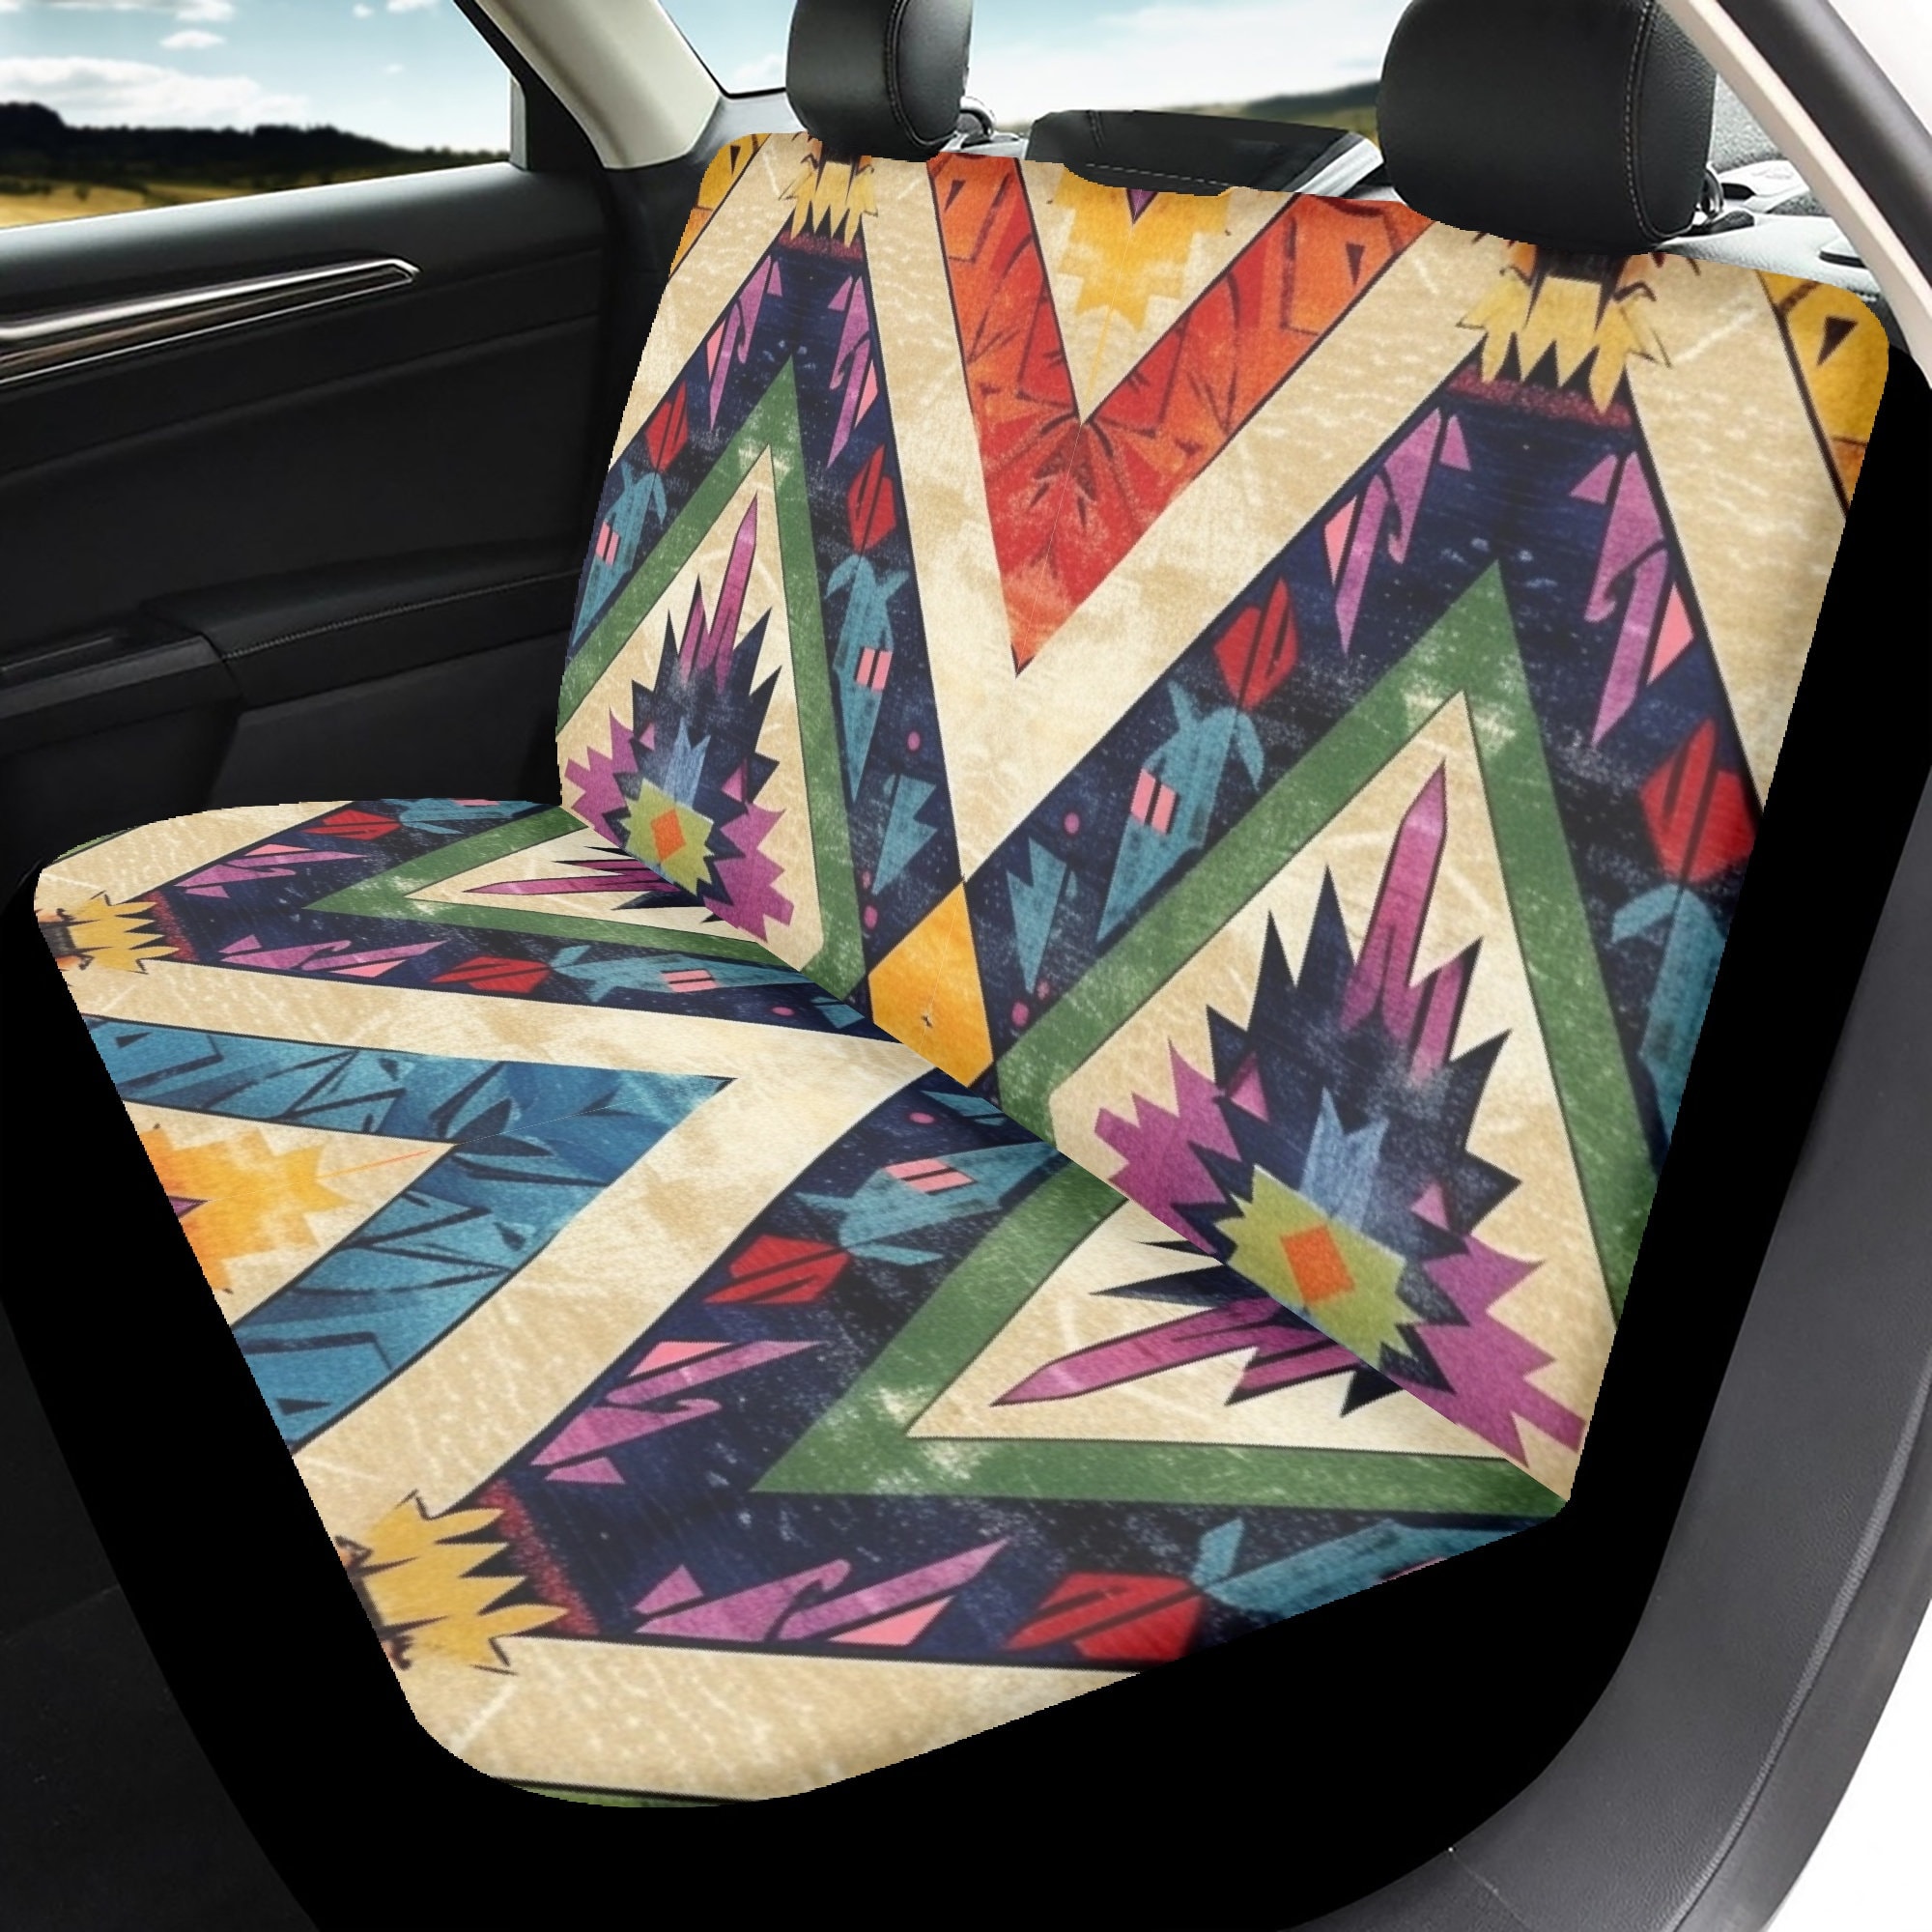 Native Seat Cover, Indian Print Seat Covers, Southwestern Seat Cover, Indian Seat Cover, Vehicle Seat Covers